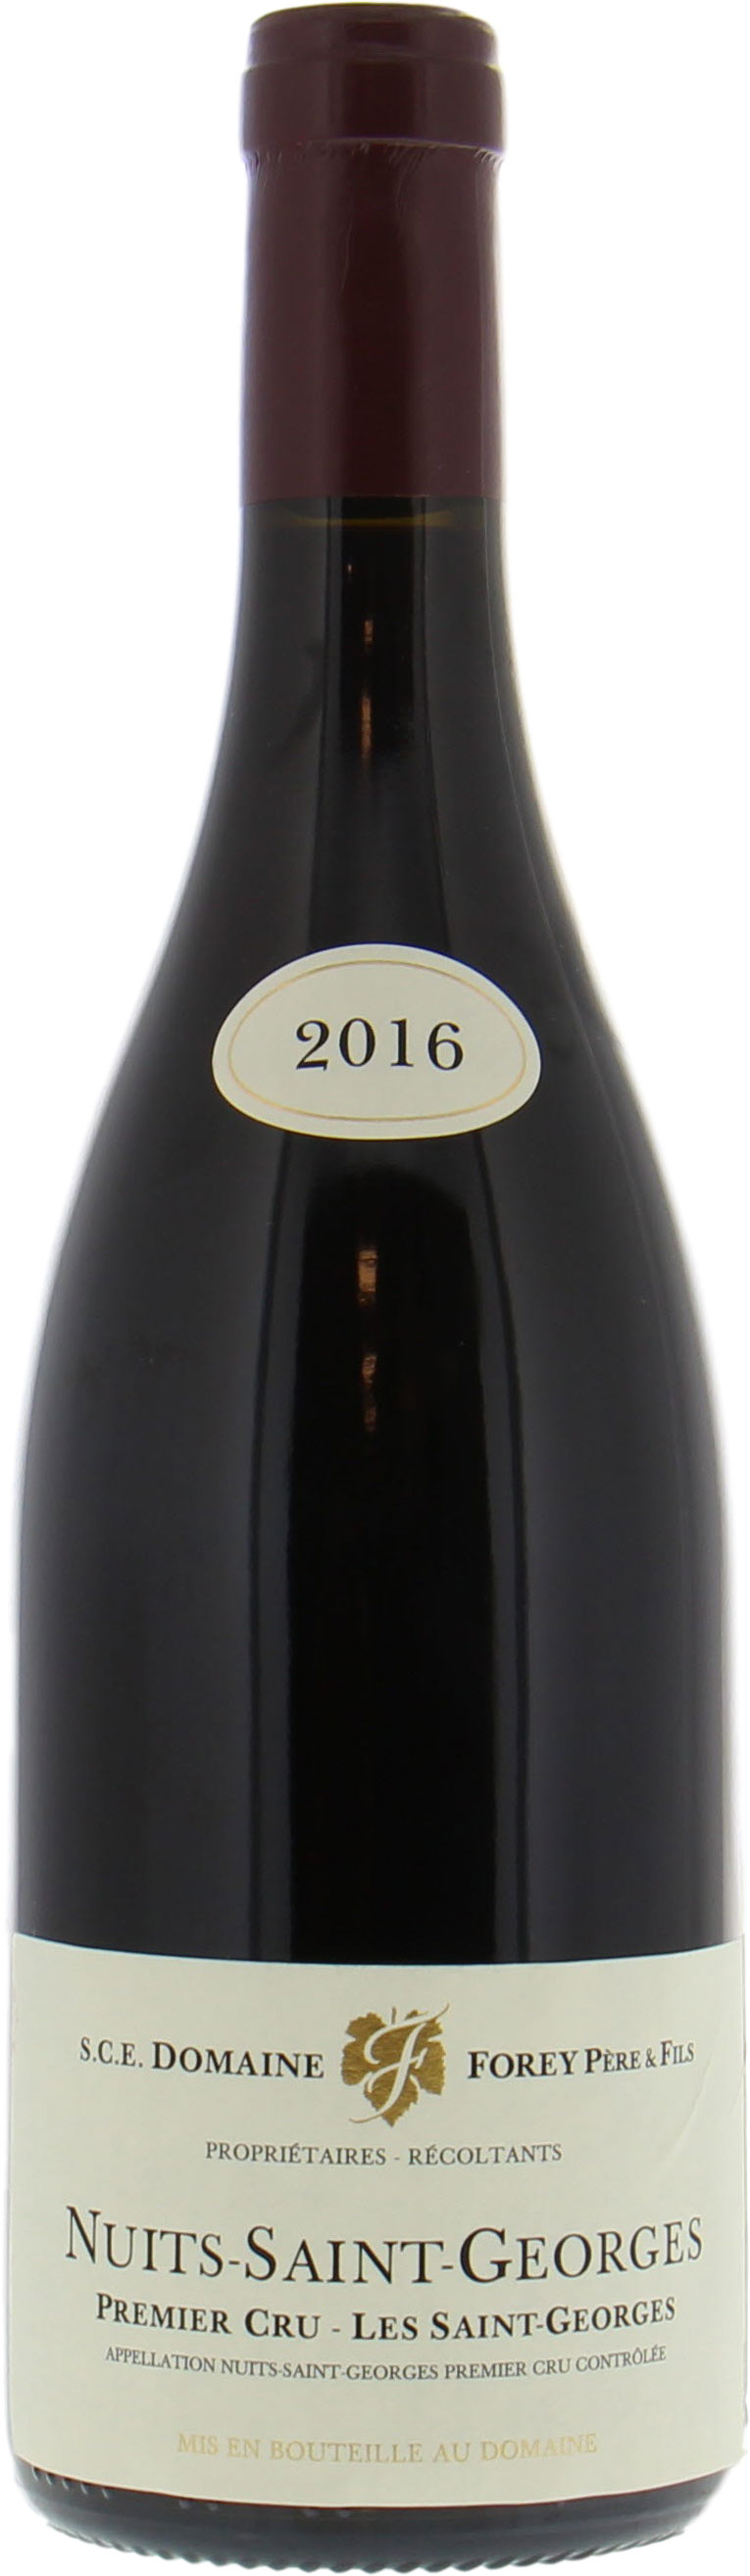 Domaine Forey Pere & Fils - Nuits St. Georges 1er Cru St. Georges 2016 Perfect